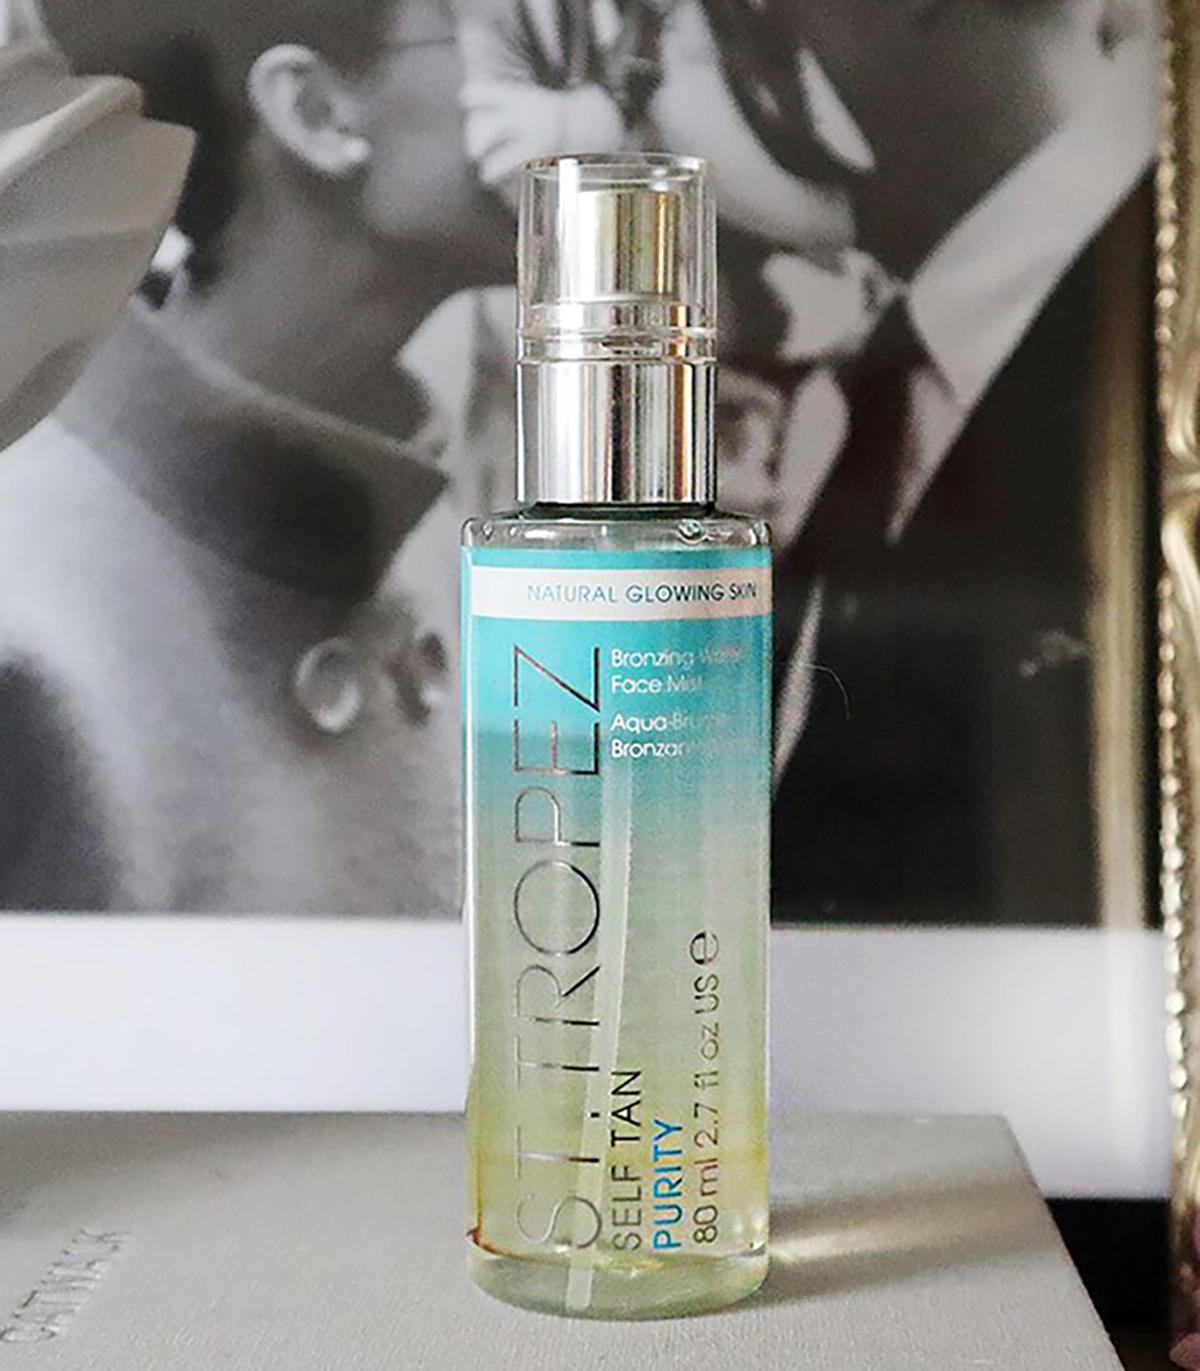 St Tropez Purity Face Mist Review - The Reluctant Blogger